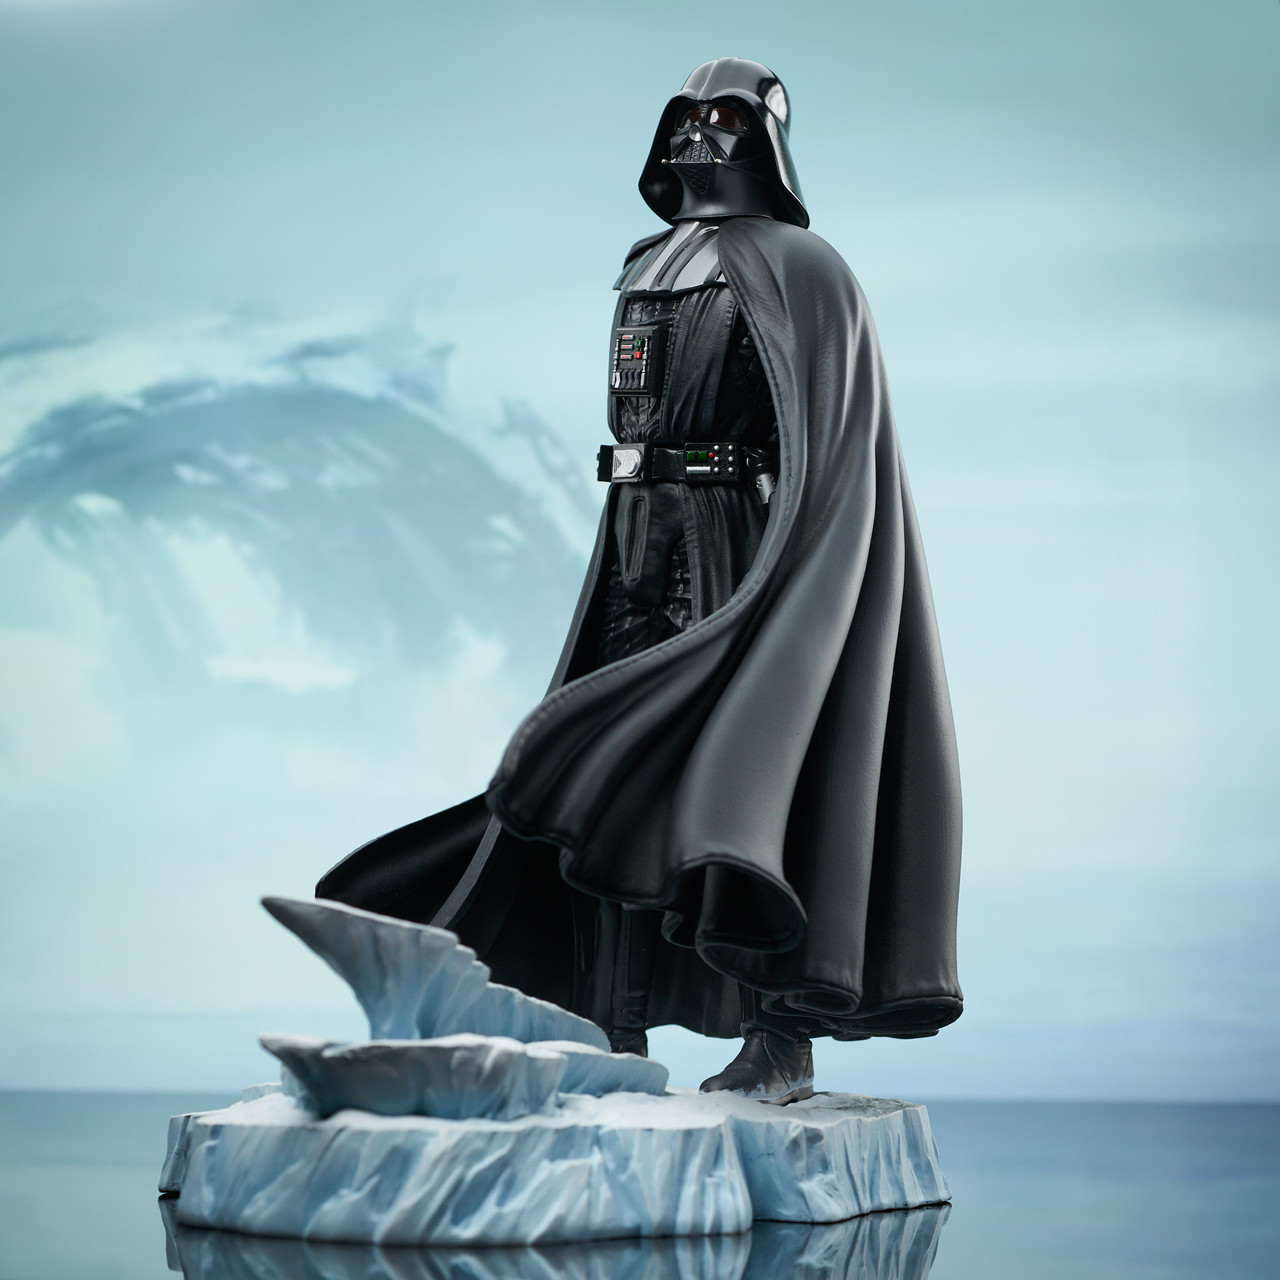 Is This the Coolest Darth Vader Statue Ever? - IGN